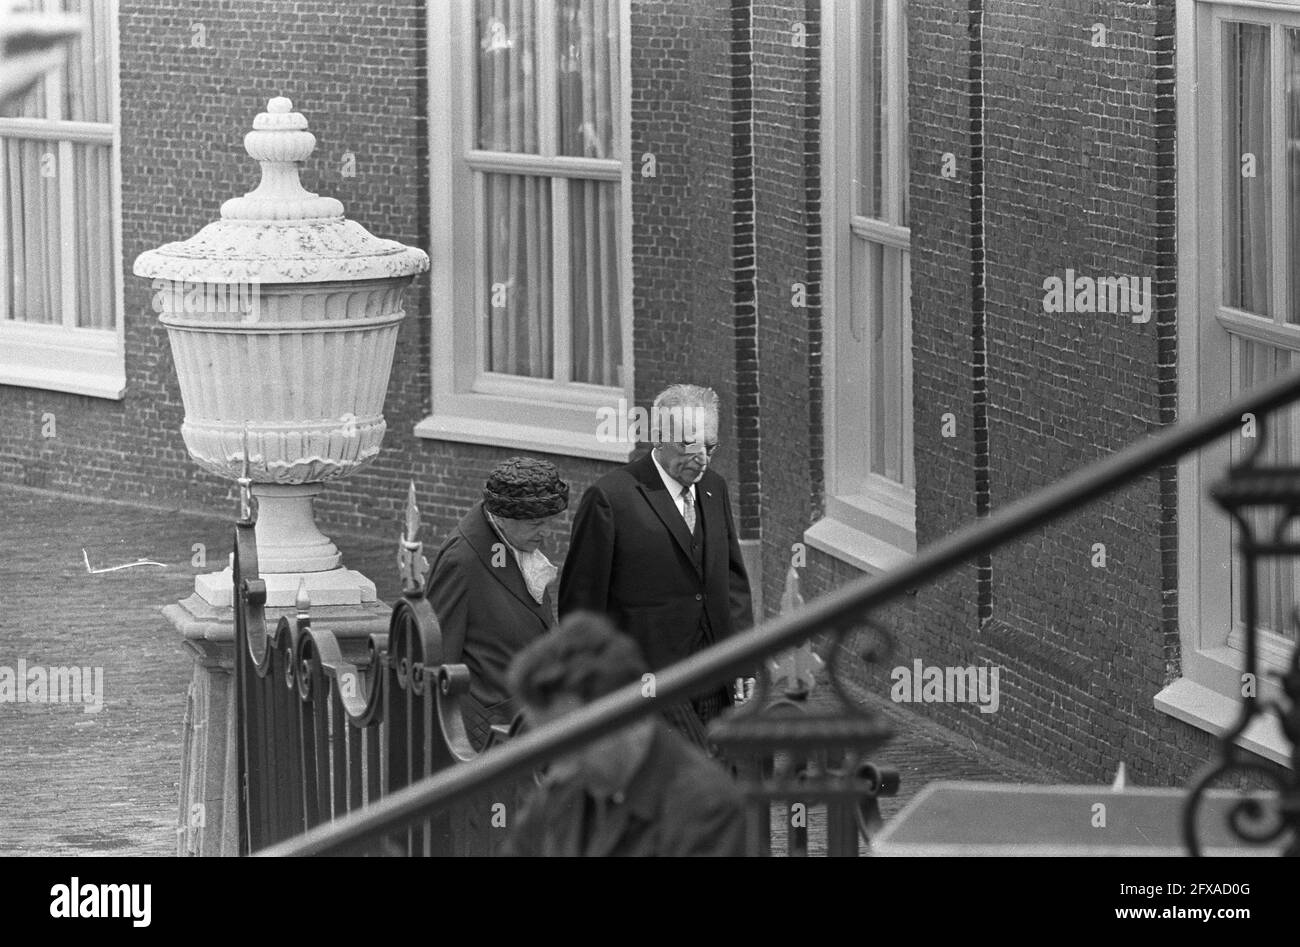 Christening Willem Alexander . Arrival Huis ten Bosch . Dr. Drees and wife, September 2, 1967, Christening ceremonies, arrivals, princes, The Netherlands, 20th century press agency photo, news to remember, documentary, historic photography 1945-1990, visual stories, human history of the Twentieth Century, capturing moments in time Stock Photo